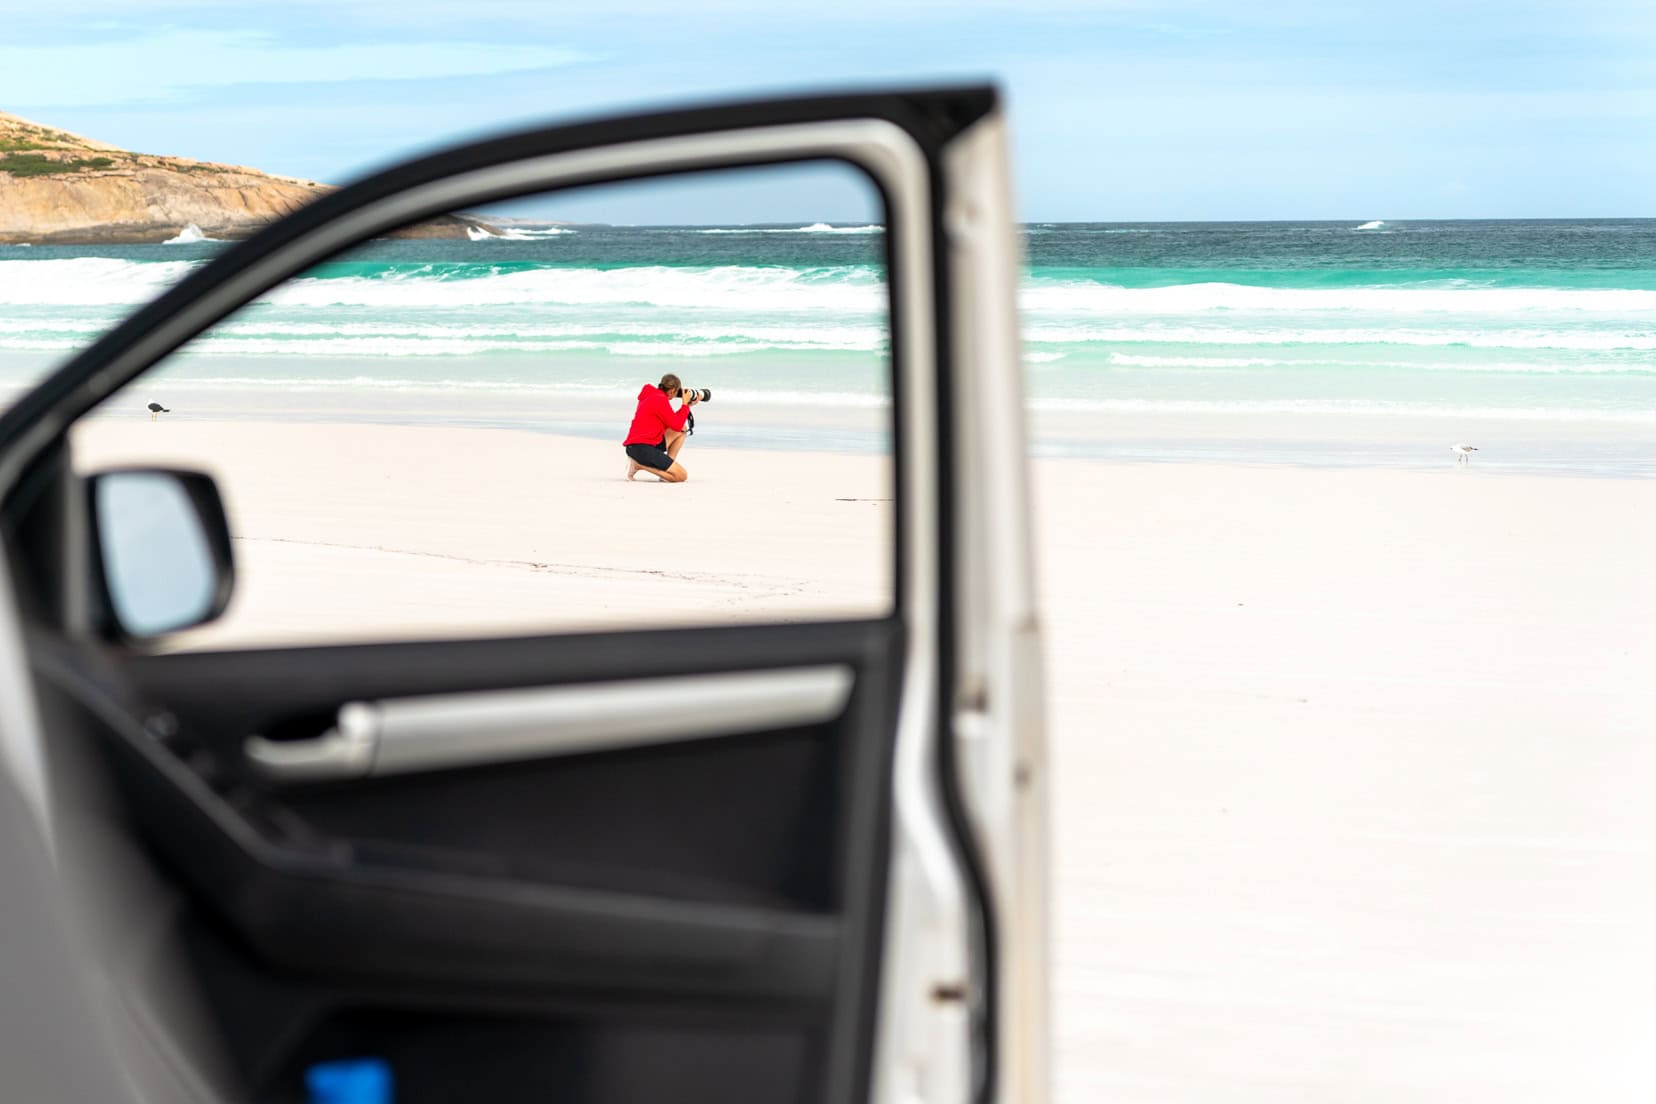 CAr door open with image of shelley taking a photo on the white sand beach 